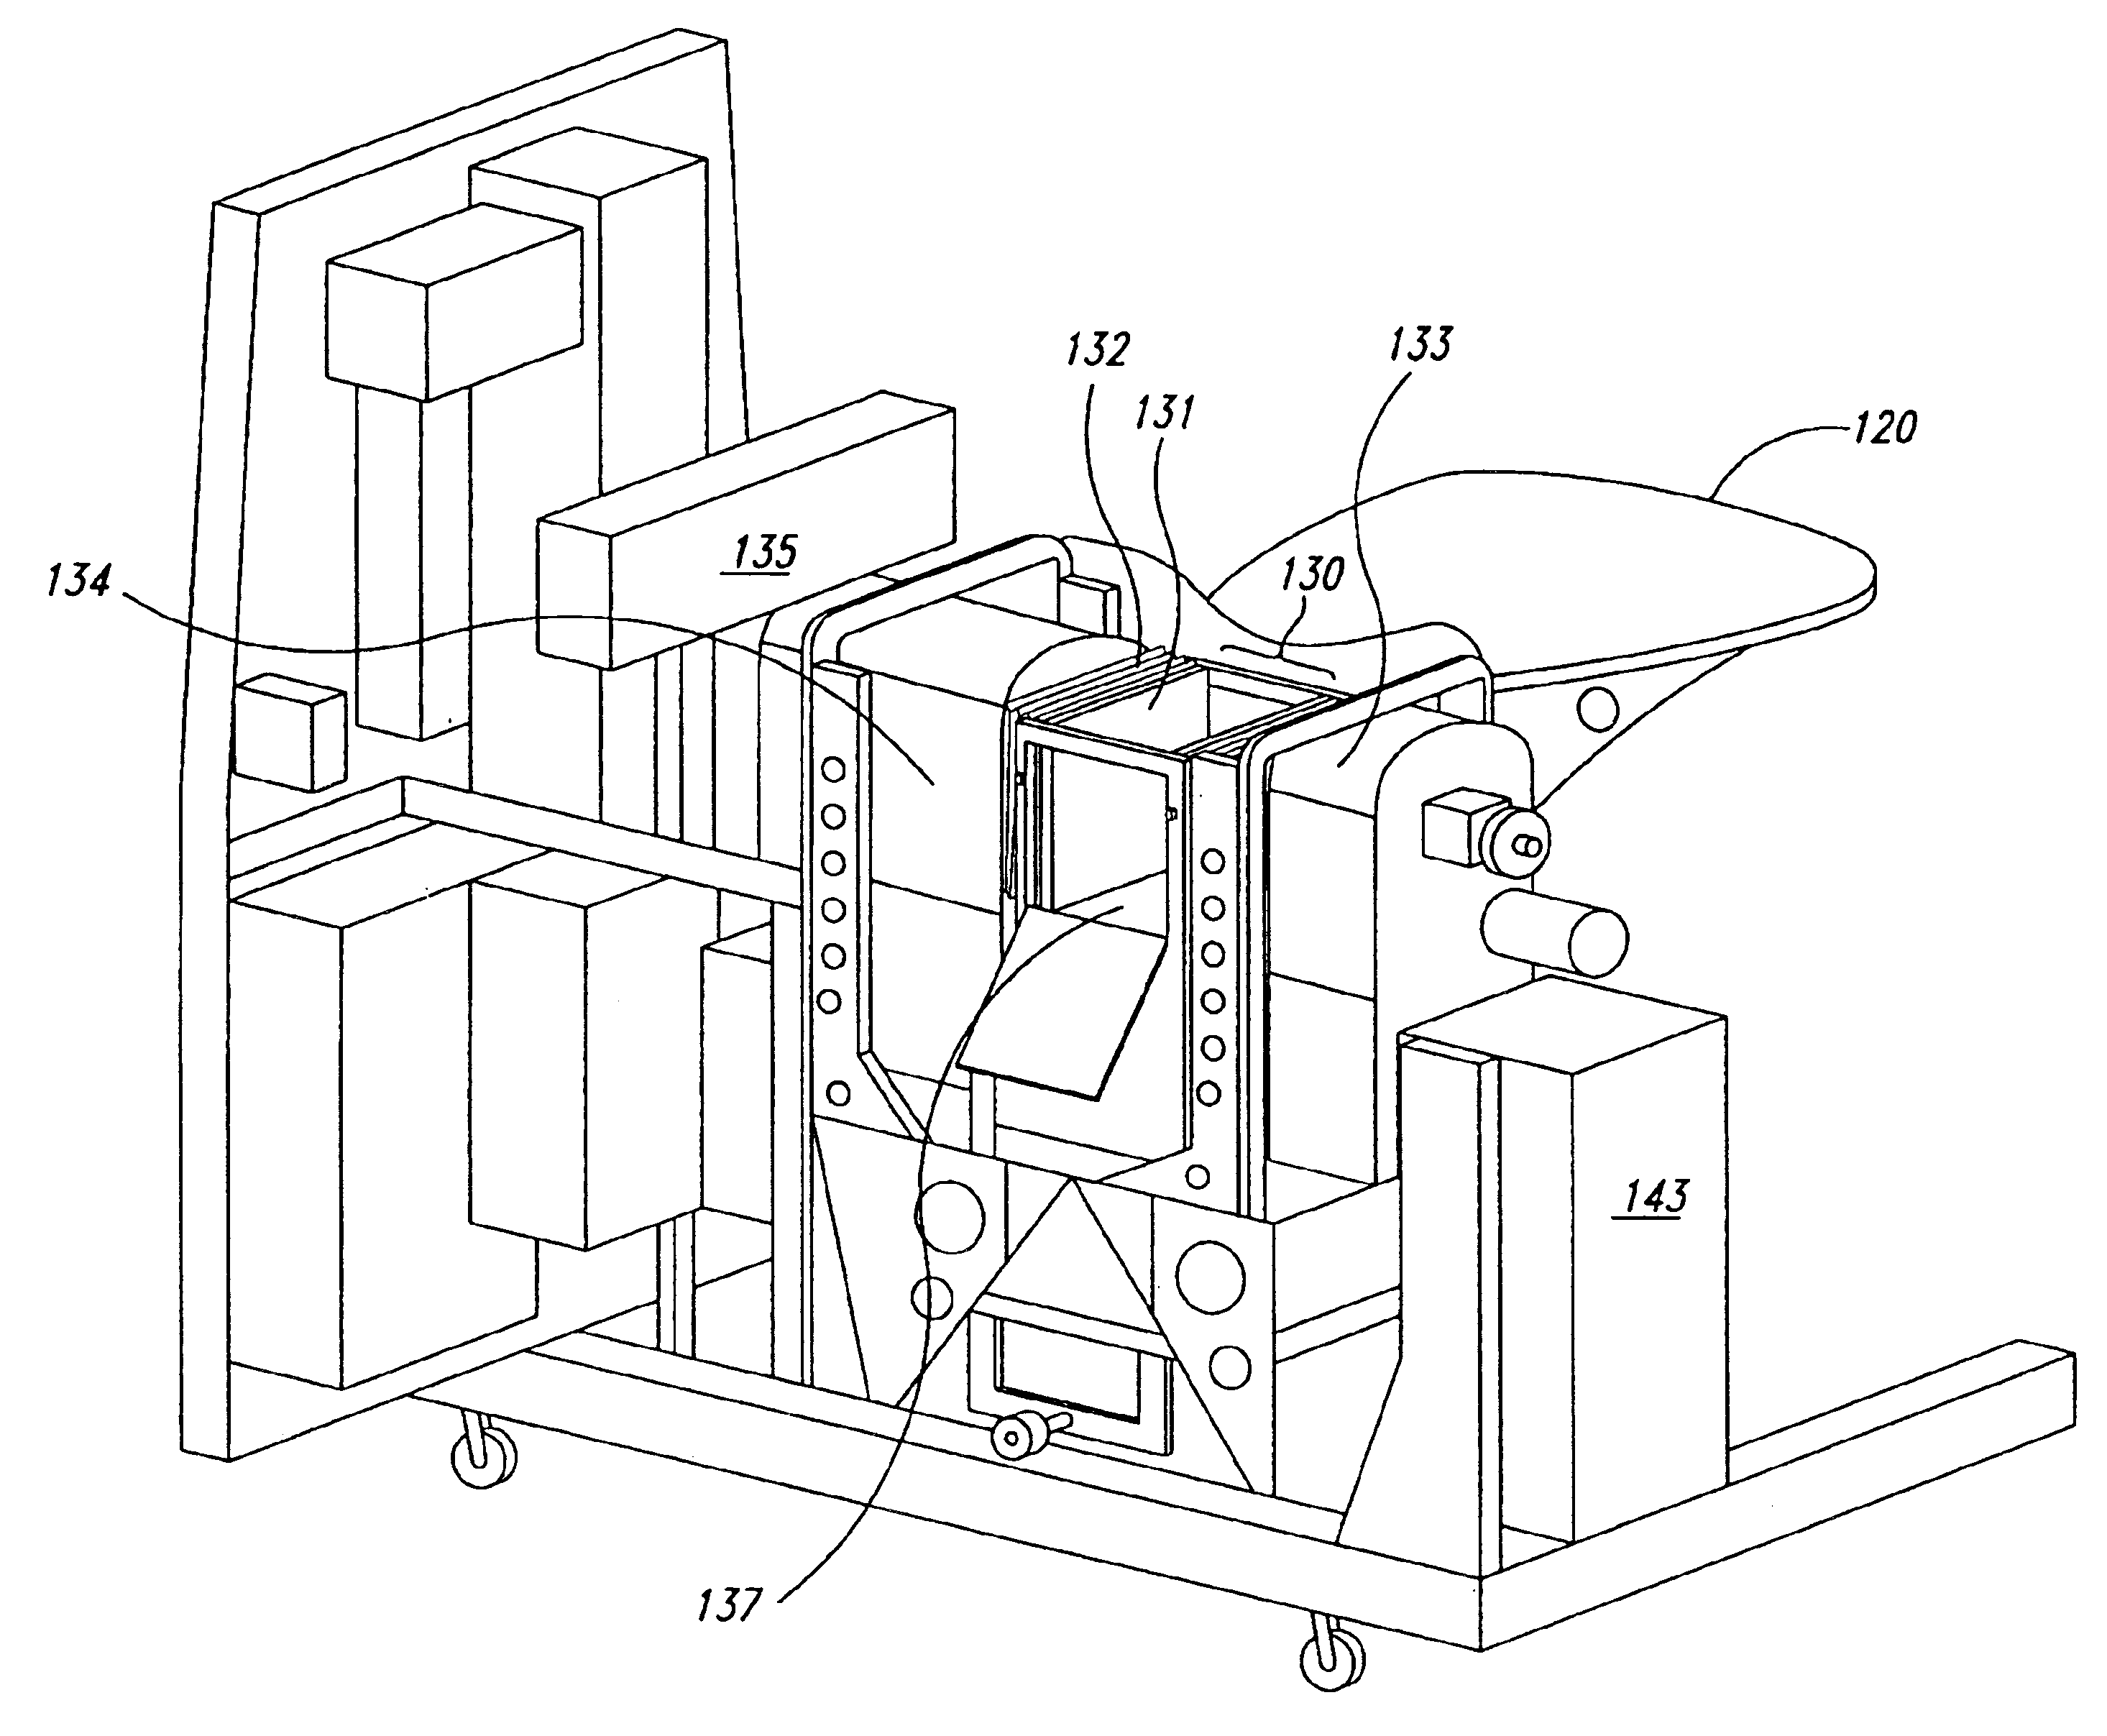 System and method for tissue biopsy using ultrasonic imaging